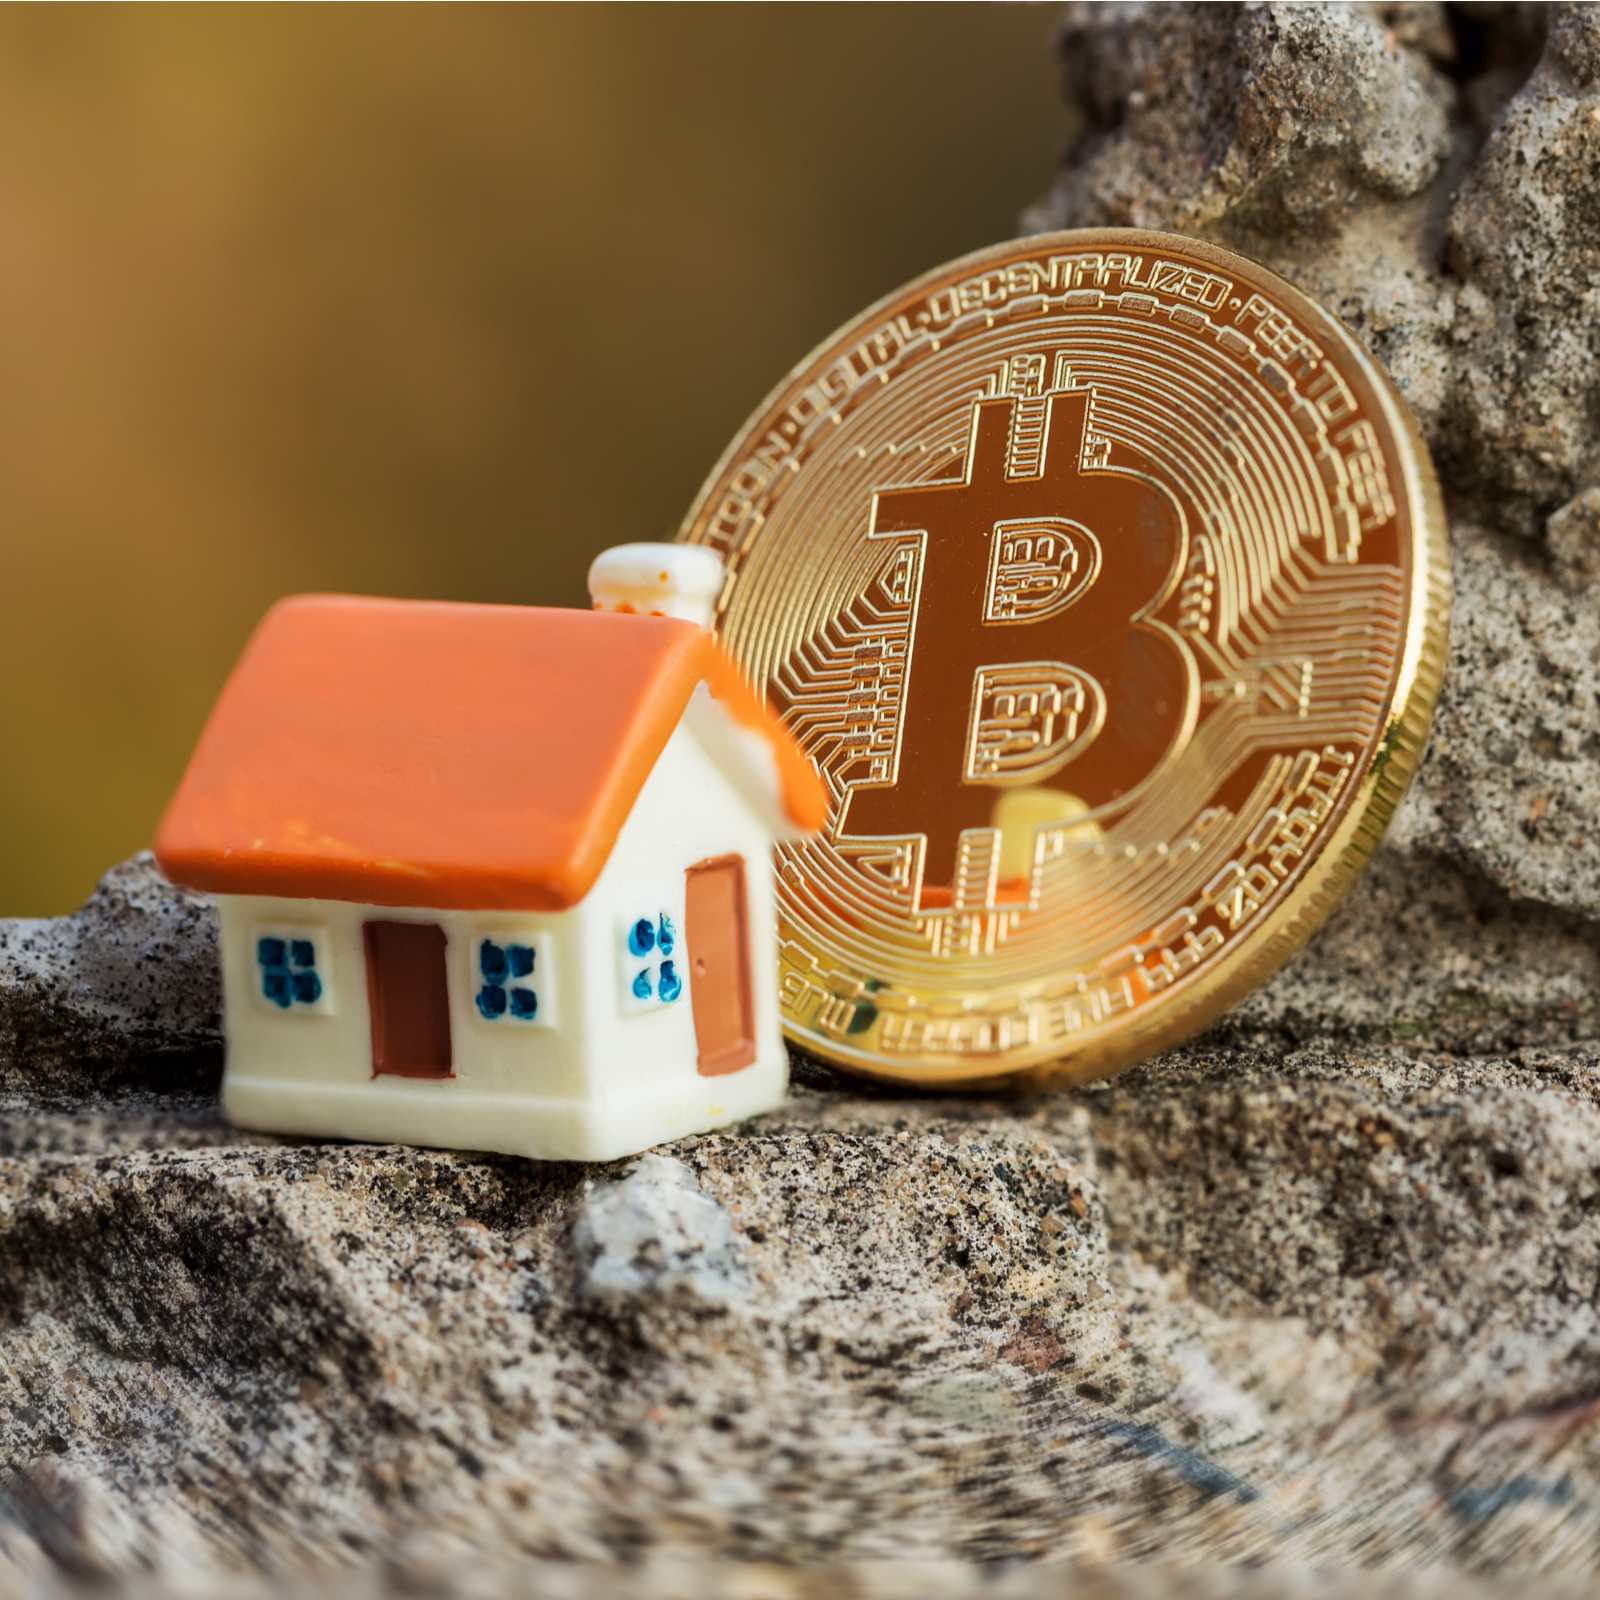 Real Estate Listings Use Bitcoin to Garner Publicity